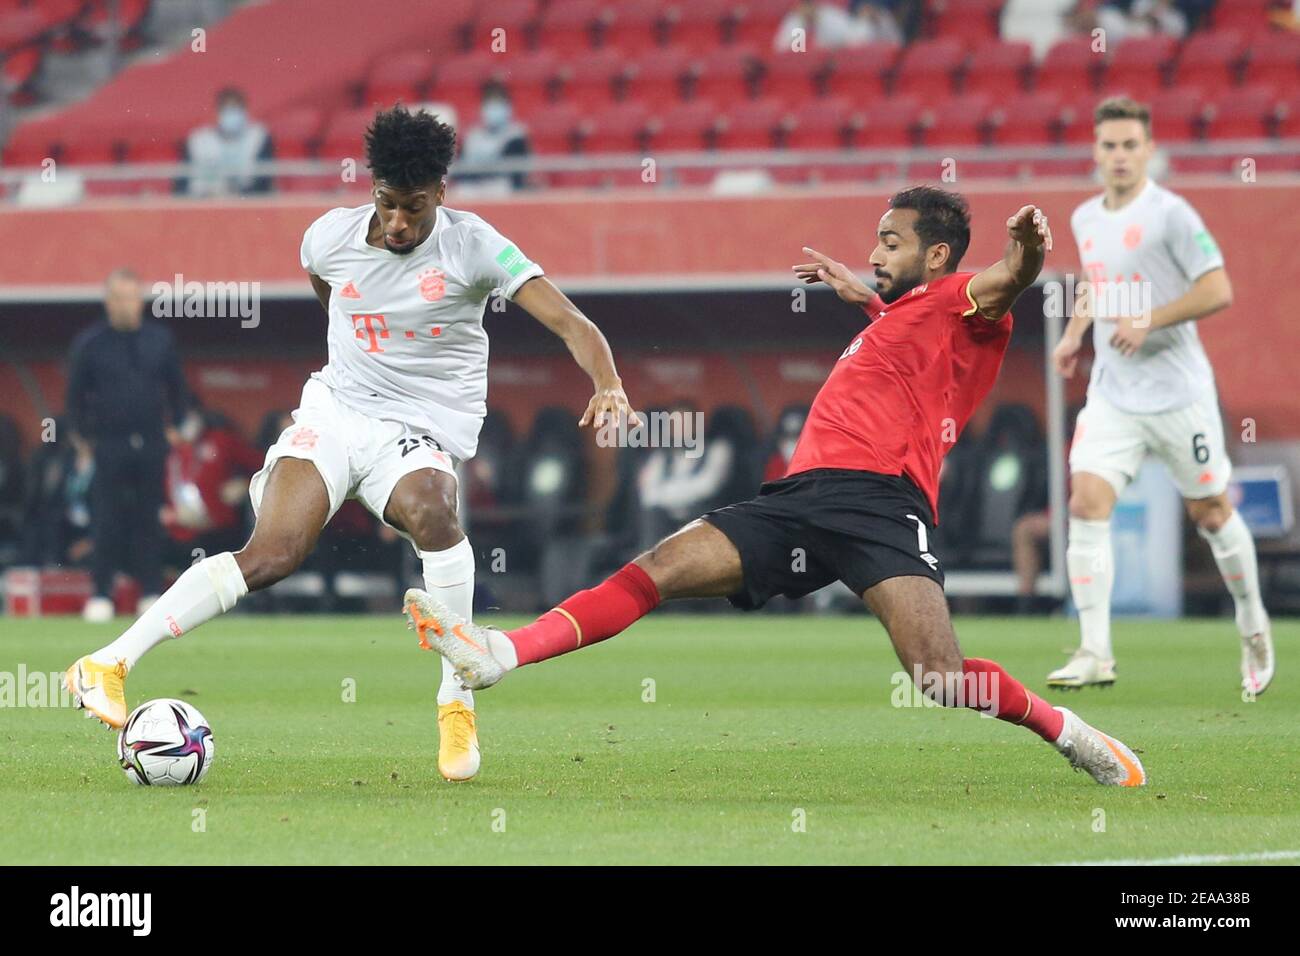 DOHA, QATAR - FEBRUARY 08: Kahraba of Al Ahly SC and Kingsley Coman of FC Bayern Muenchen during the semi-final match between Al Ahly SC and FC Bayern Muenchen at Ahmad Bin Ali Stadium on February 8, 2021 in Doha, Qatar. (Photo by Colin McPhedran/MB Media) Stock Photo